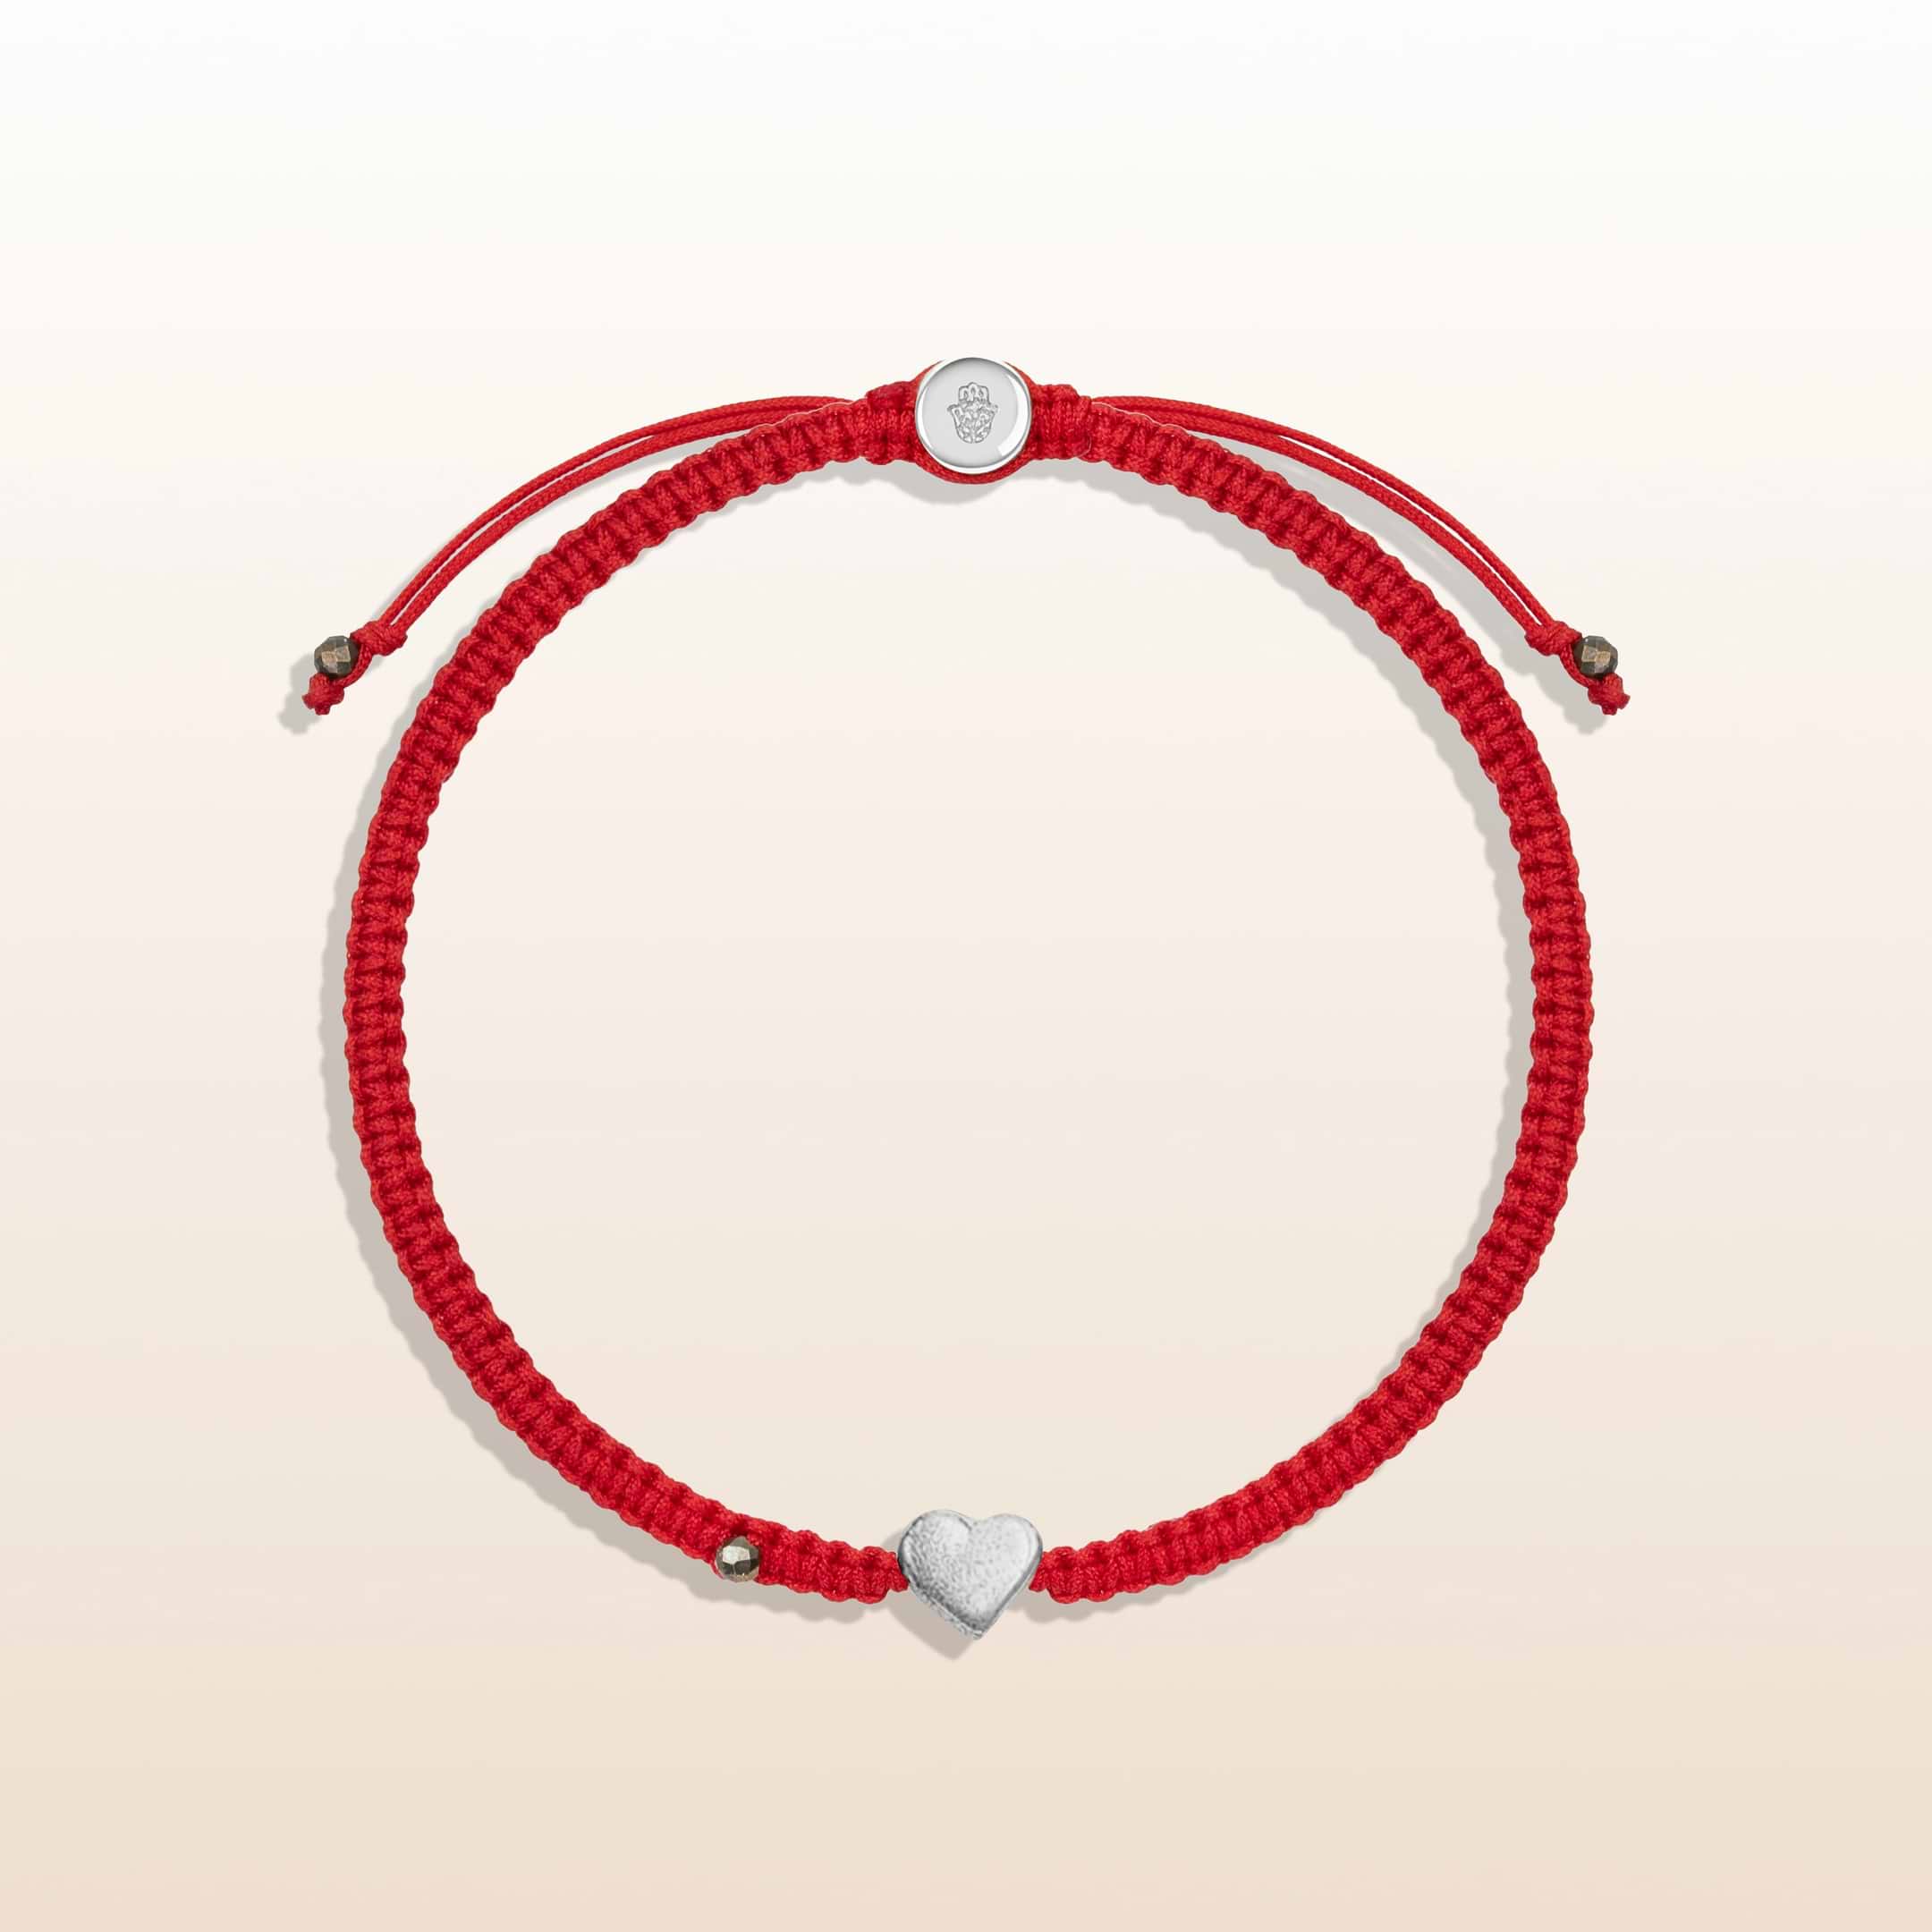 Protected by Love - Red String Heart Charm Bracelet